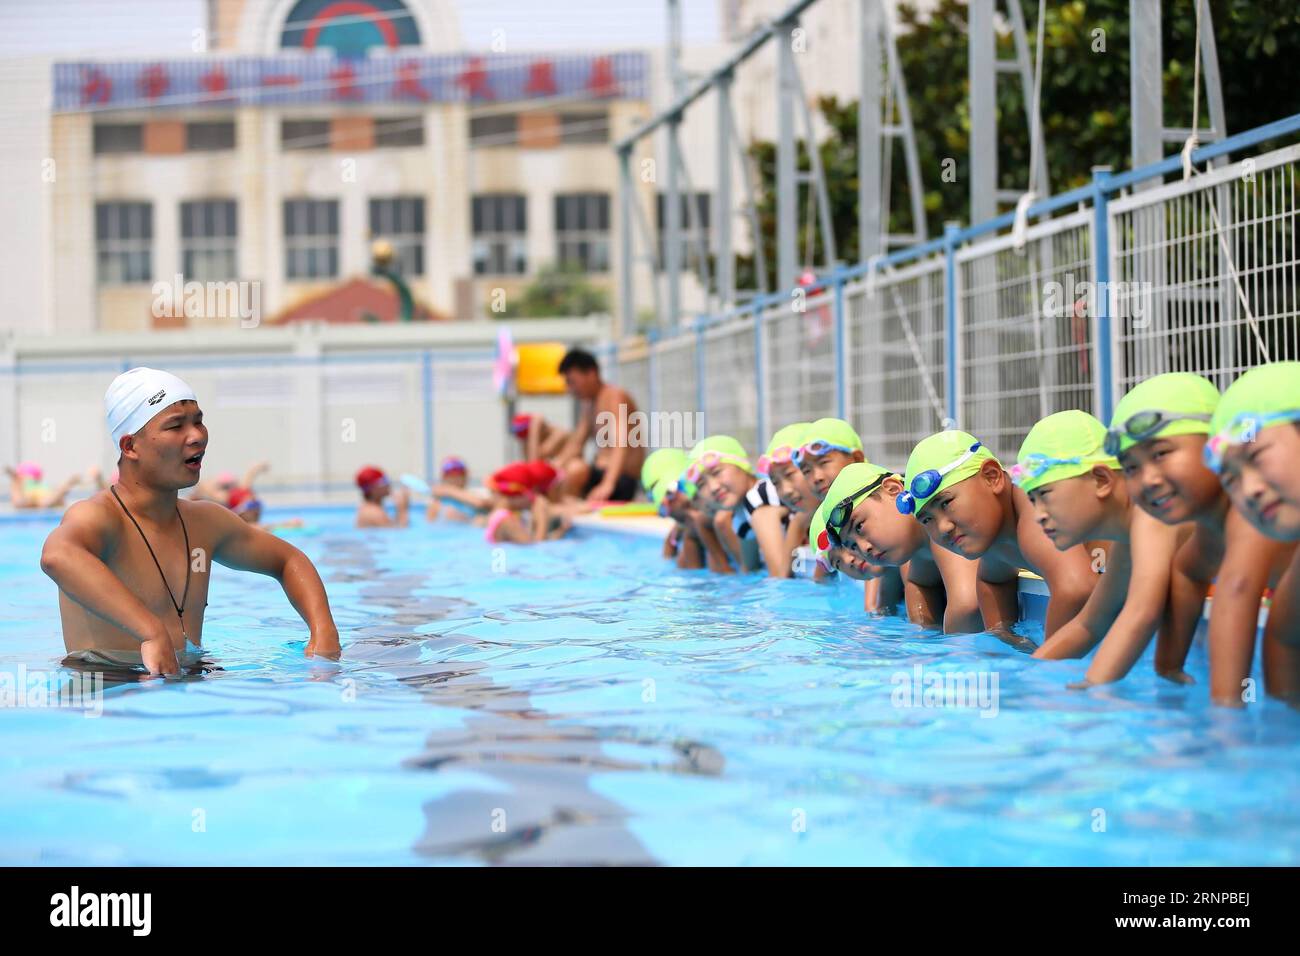 (170821) -- QINGDAO, Aug. 21, 2017 -- Students attend swimming class at No. 4 experimental primary school in Jimo City, east China s Shandong Province, Aug. 21, 2017. A 25-meter-long and 15-meter-wide mobile swimming pool was installed here during summer vacation for students learning swimming for free. )(wsw) CHINA-QINGDAO-MOBILE SWIMMING POOL-SWIMMING CLASS (CN) LiangxXiaopeng PUBLICATIONxNOTxINxCHN   Qingdao Aug 21 2017 Students attend Swimming Class AT No 4 Experimental Primary School in JIMO City East China S Shan Dong Province Aug 21 2017 a 25 Metres Long and 15 Metres Wide Mobile Swimmi Stock Photo